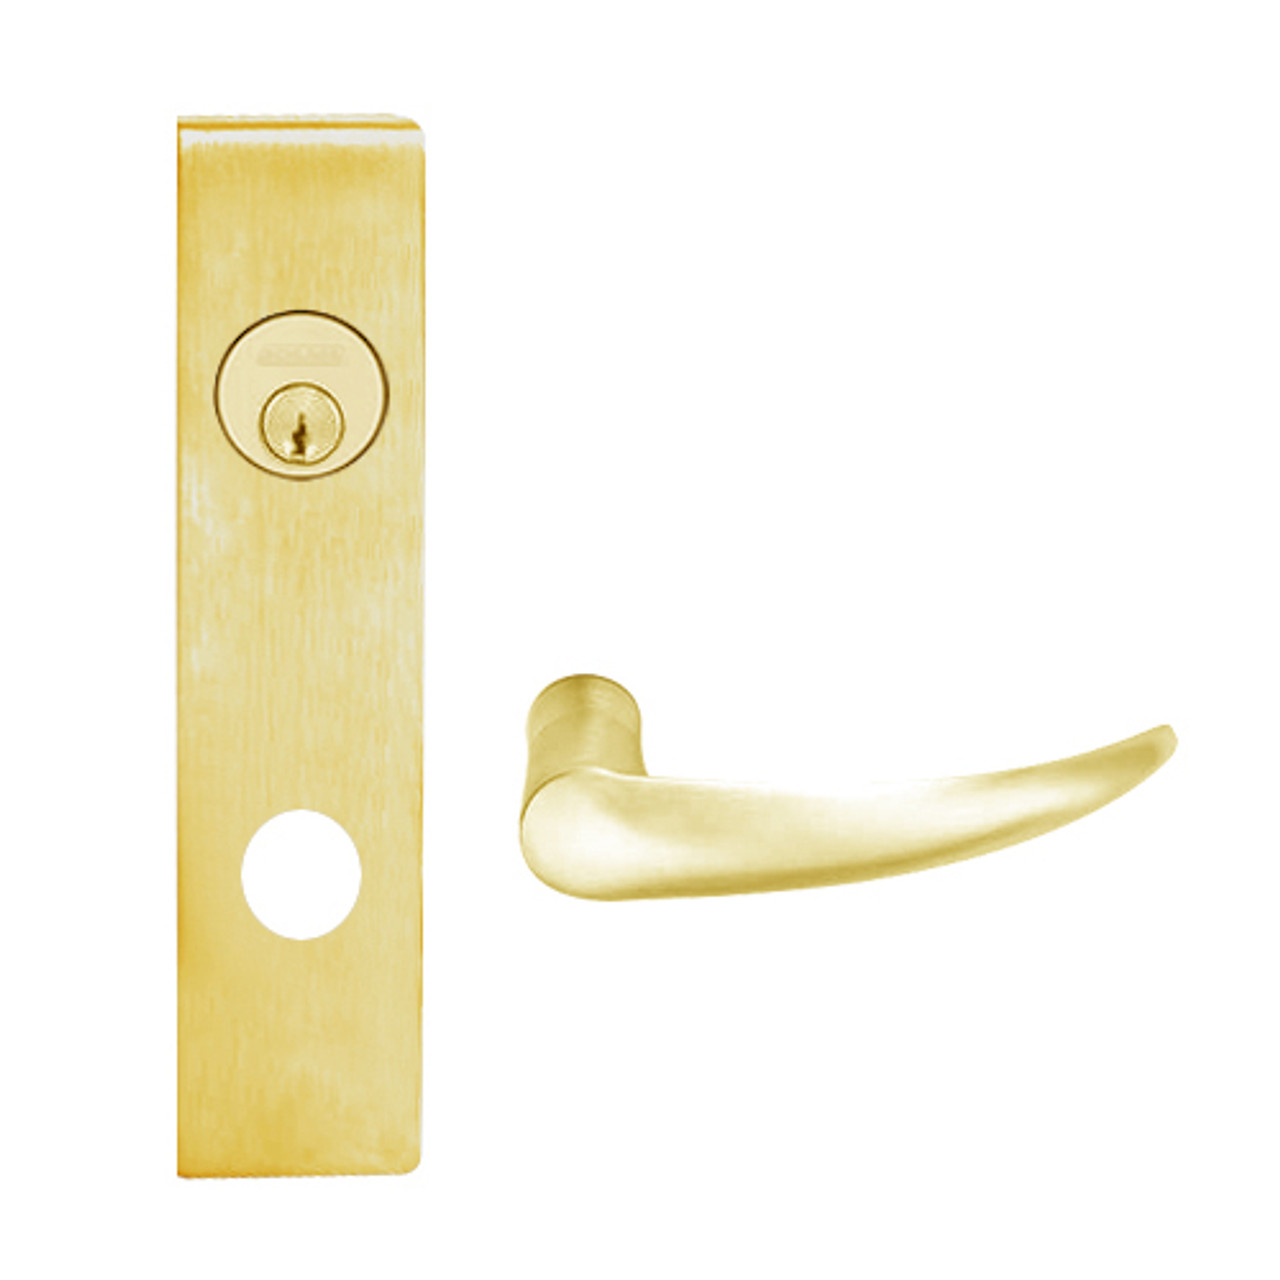 L9456P-OME-L-605 Schlage L Series Corridor with Deadbolt Commercial Mortise Lock with Omega Lever Design in Bright Brass